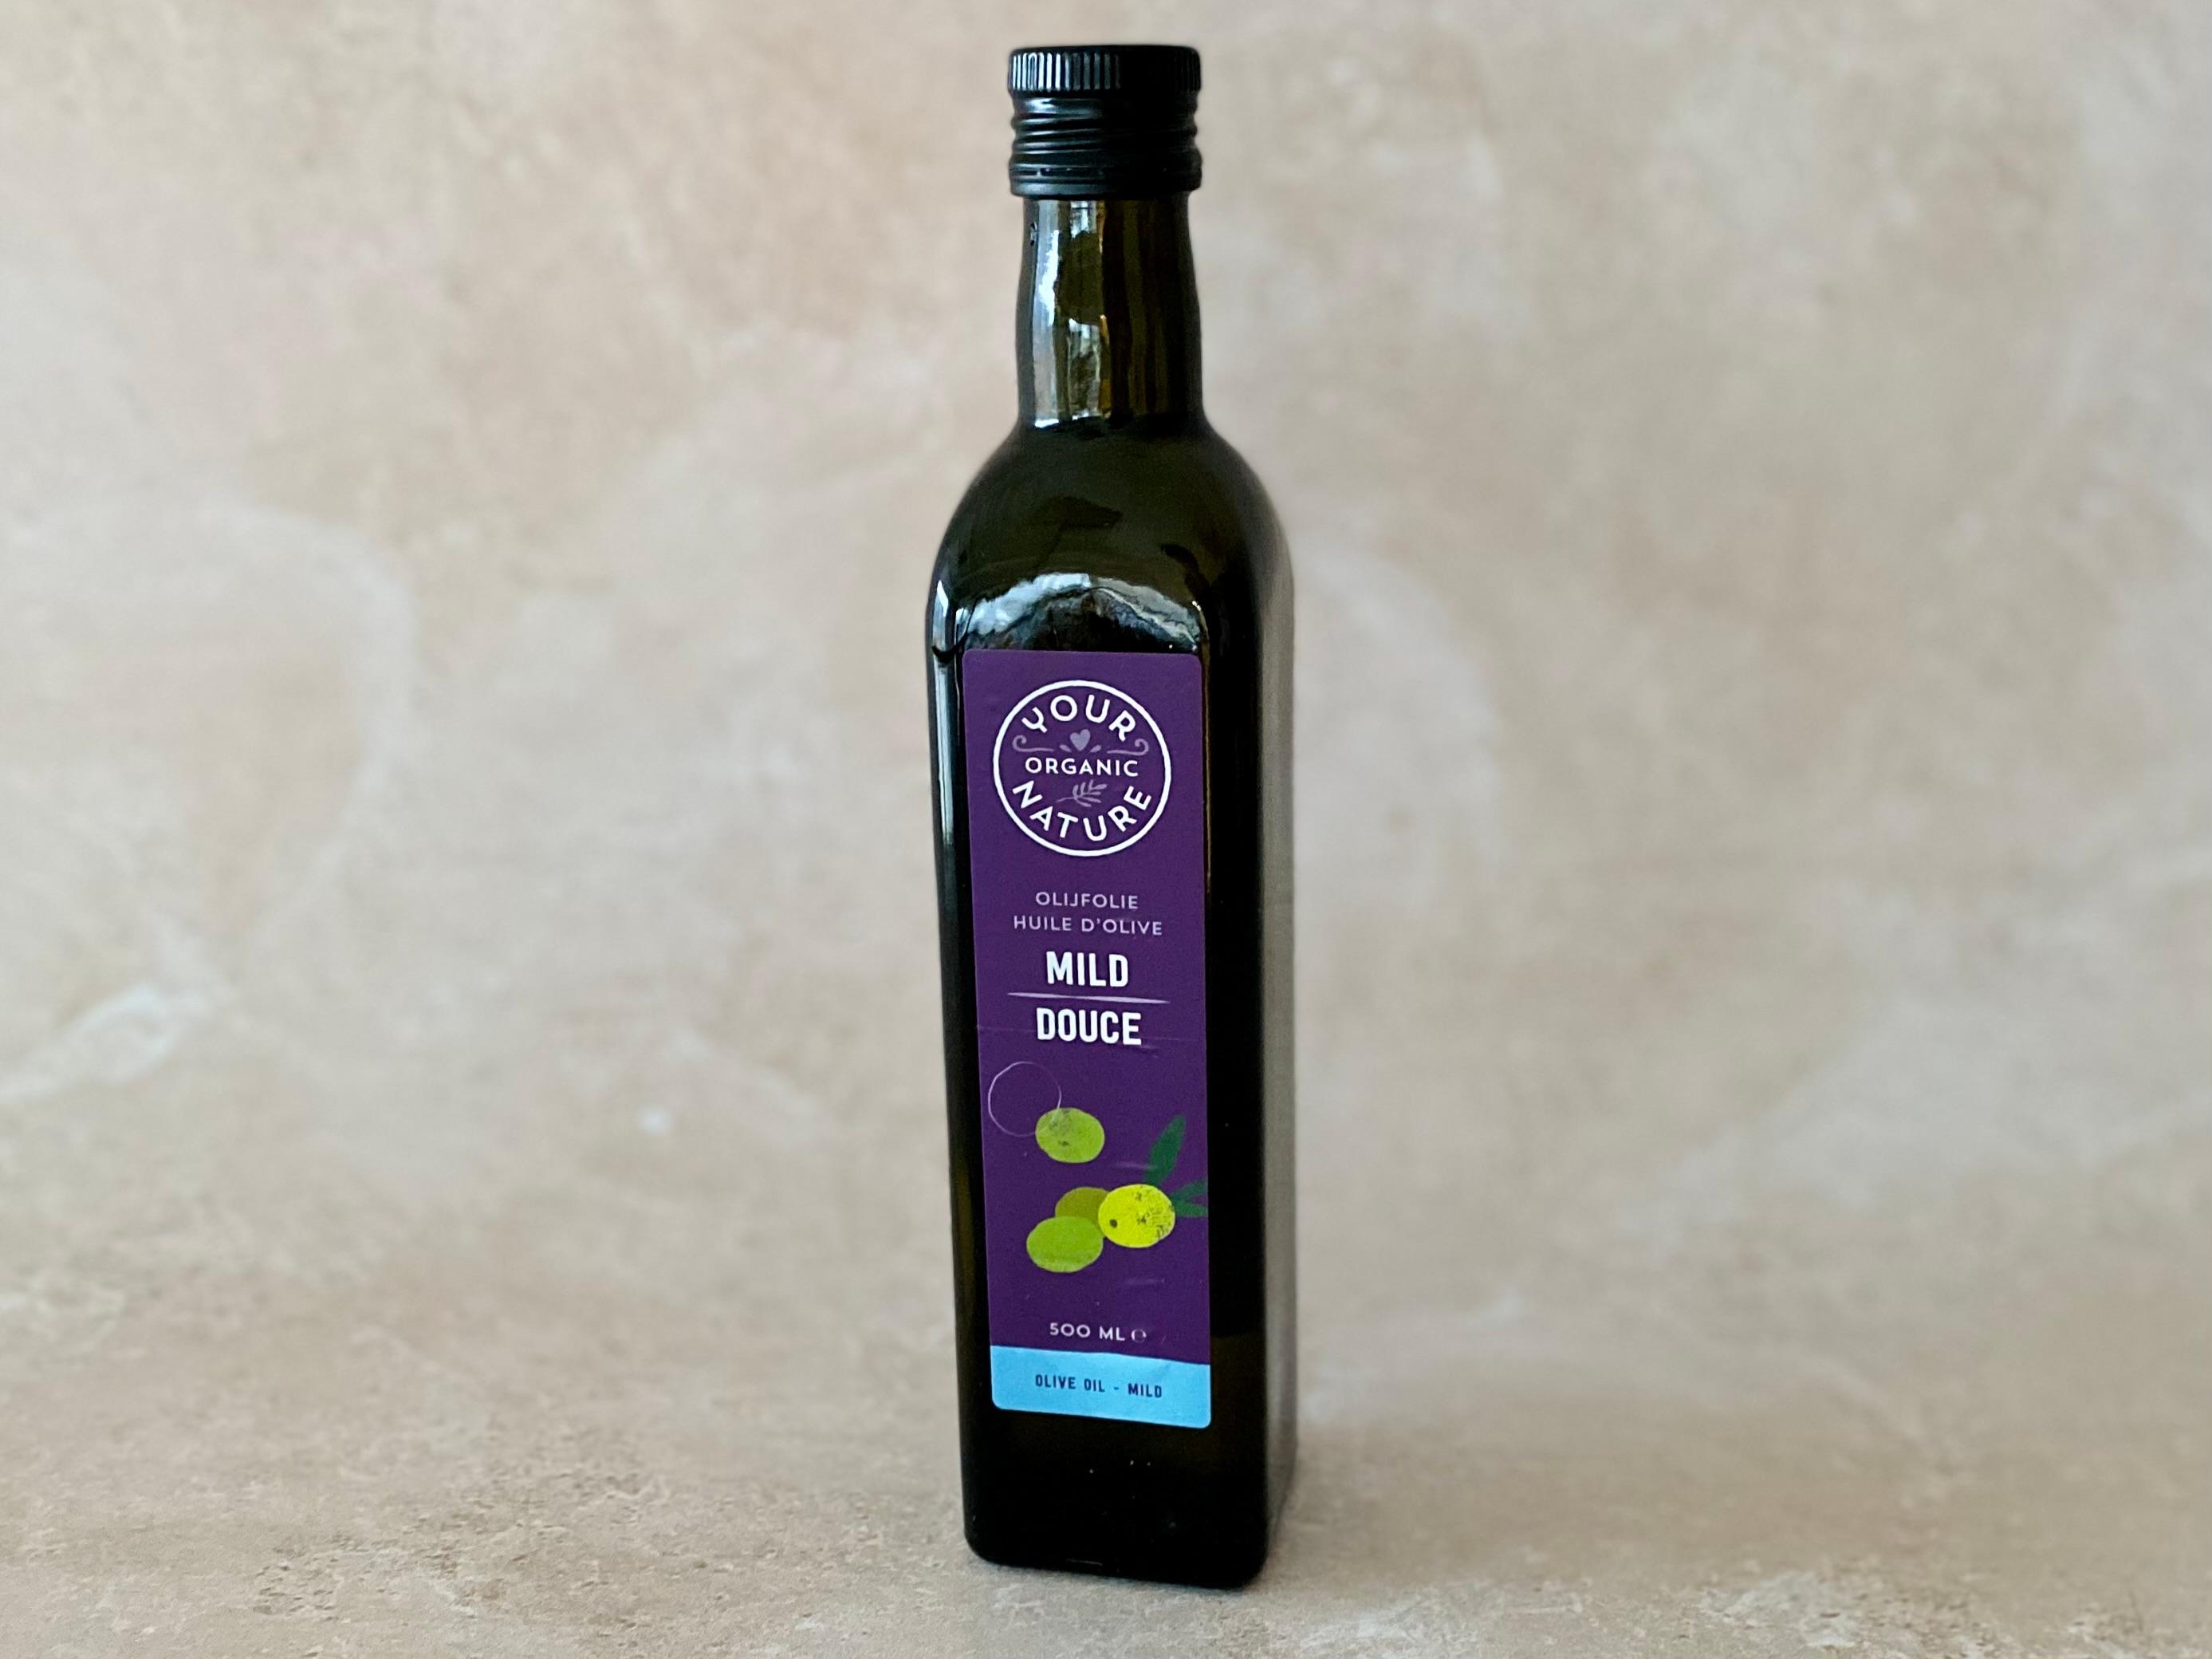 Huile d'olive douce, Your Organic Nature